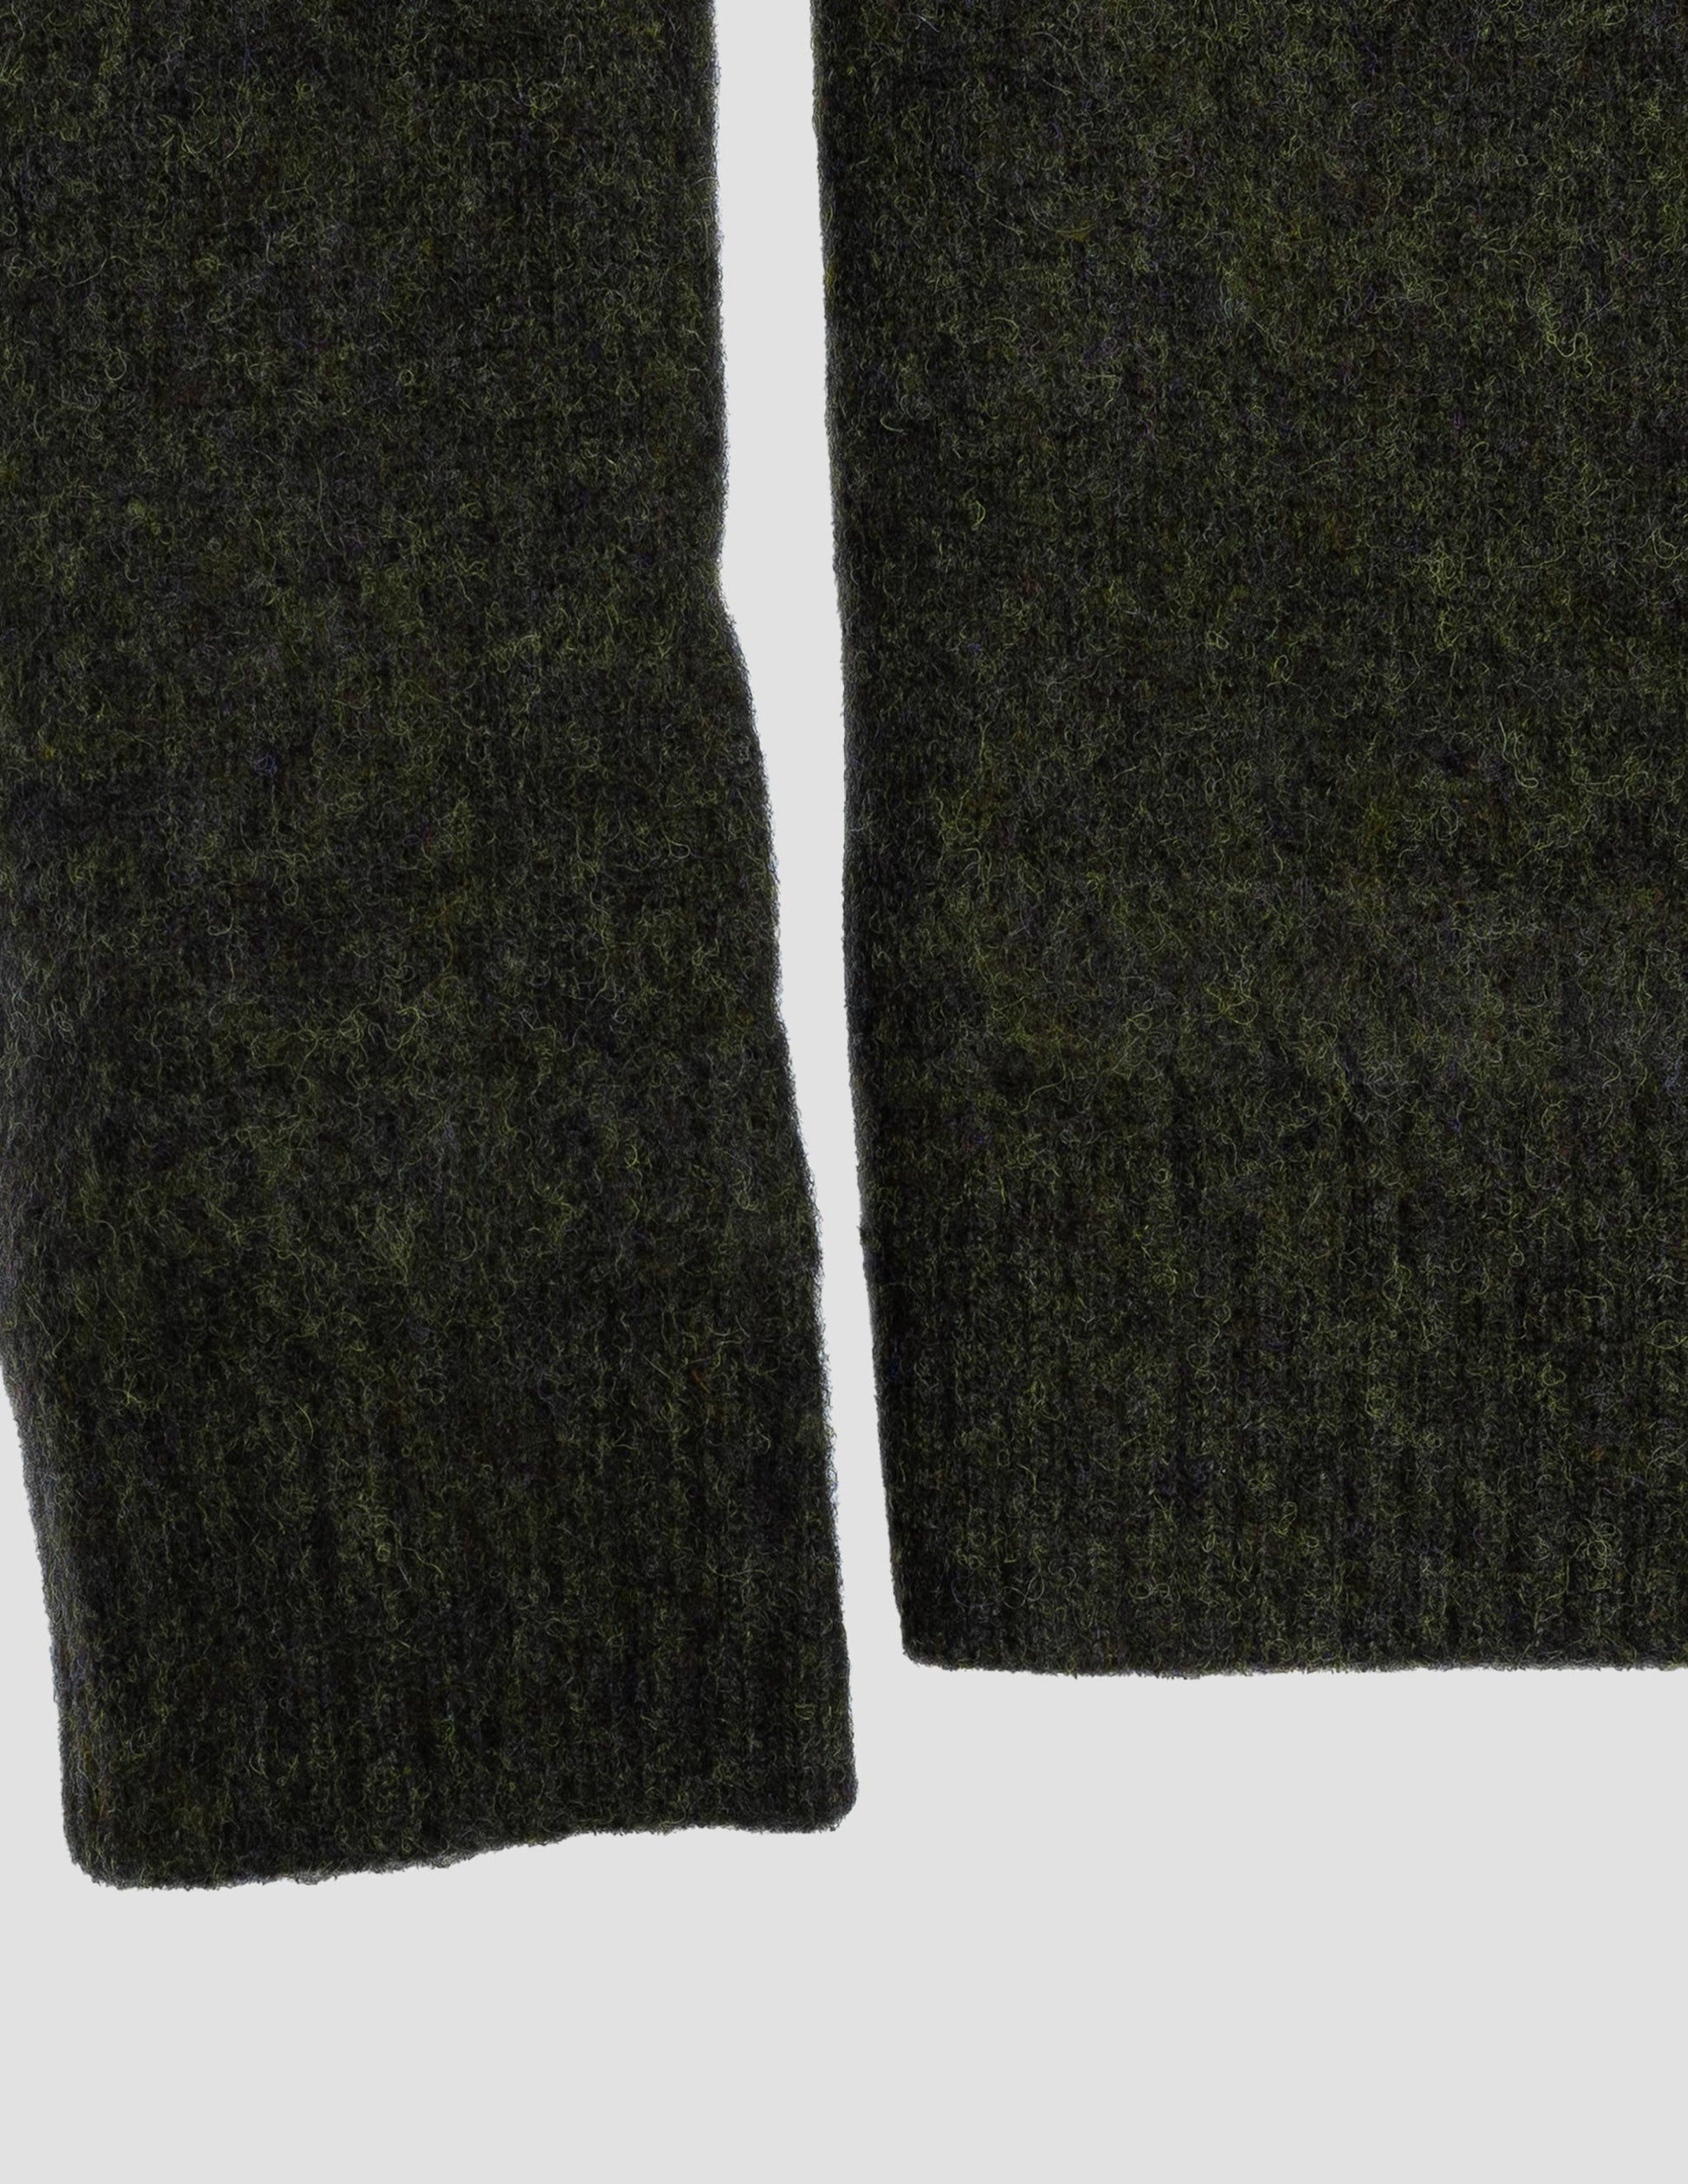 Rivay Highlands Shetland Sweater in Olive Drab